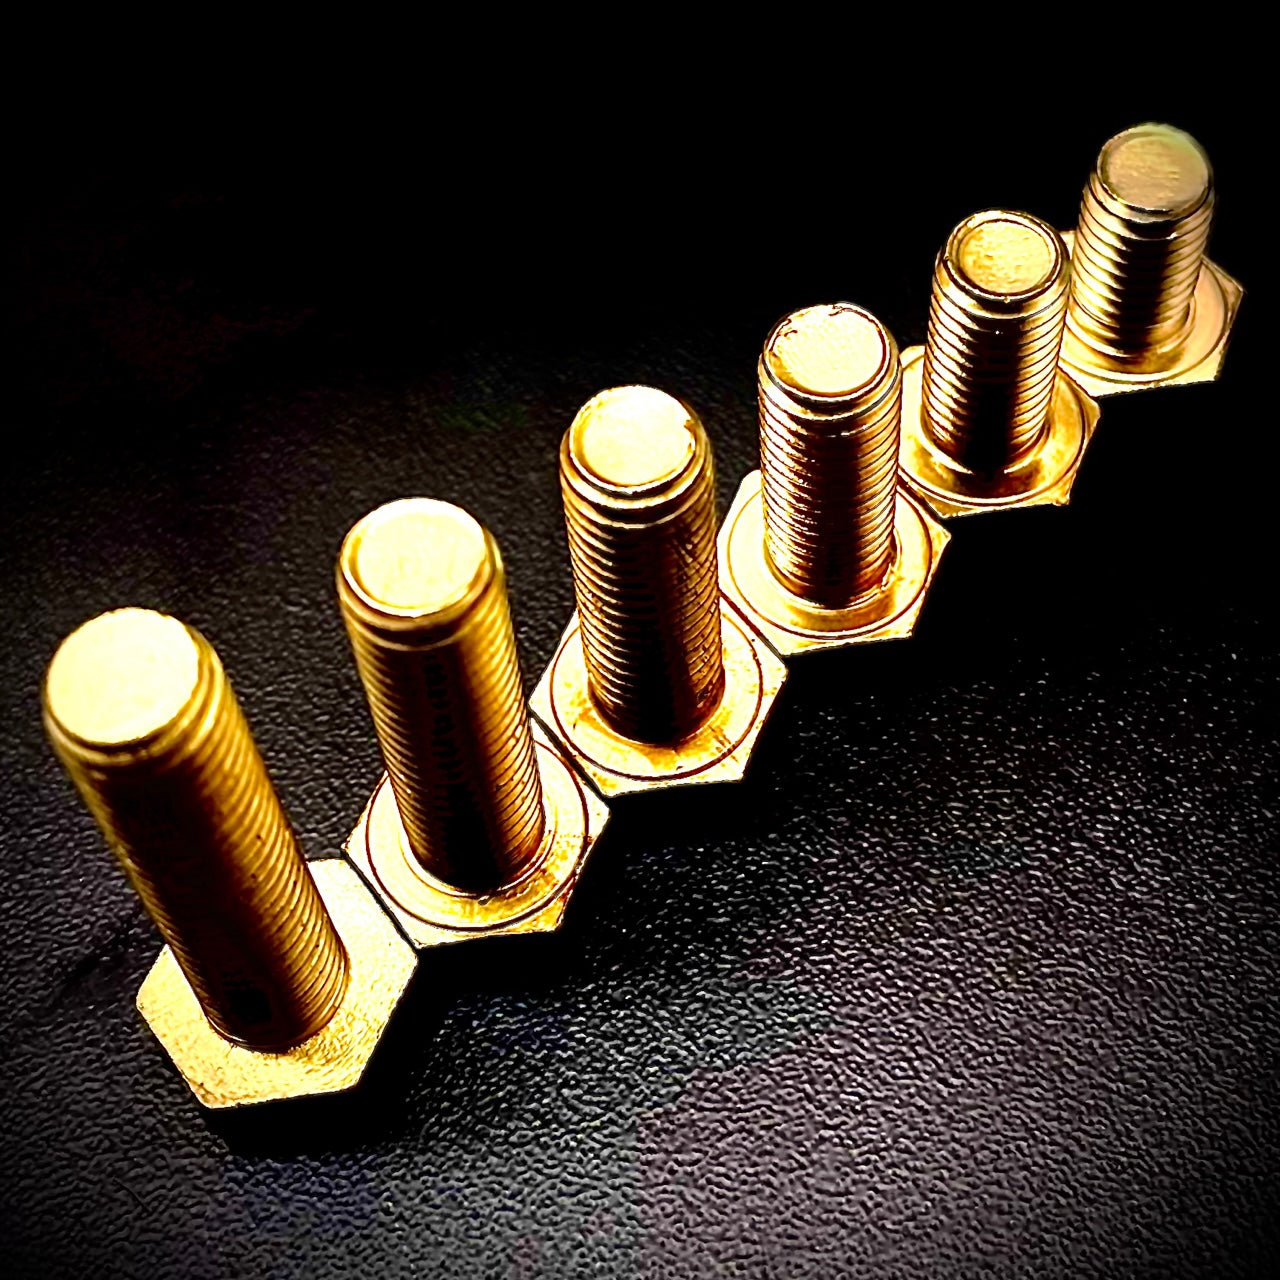 M5 Brass Hex Set Screw Fully Threaded Bolt DIN933 - Fixaball Ltd. Fixings and Fasteners UK